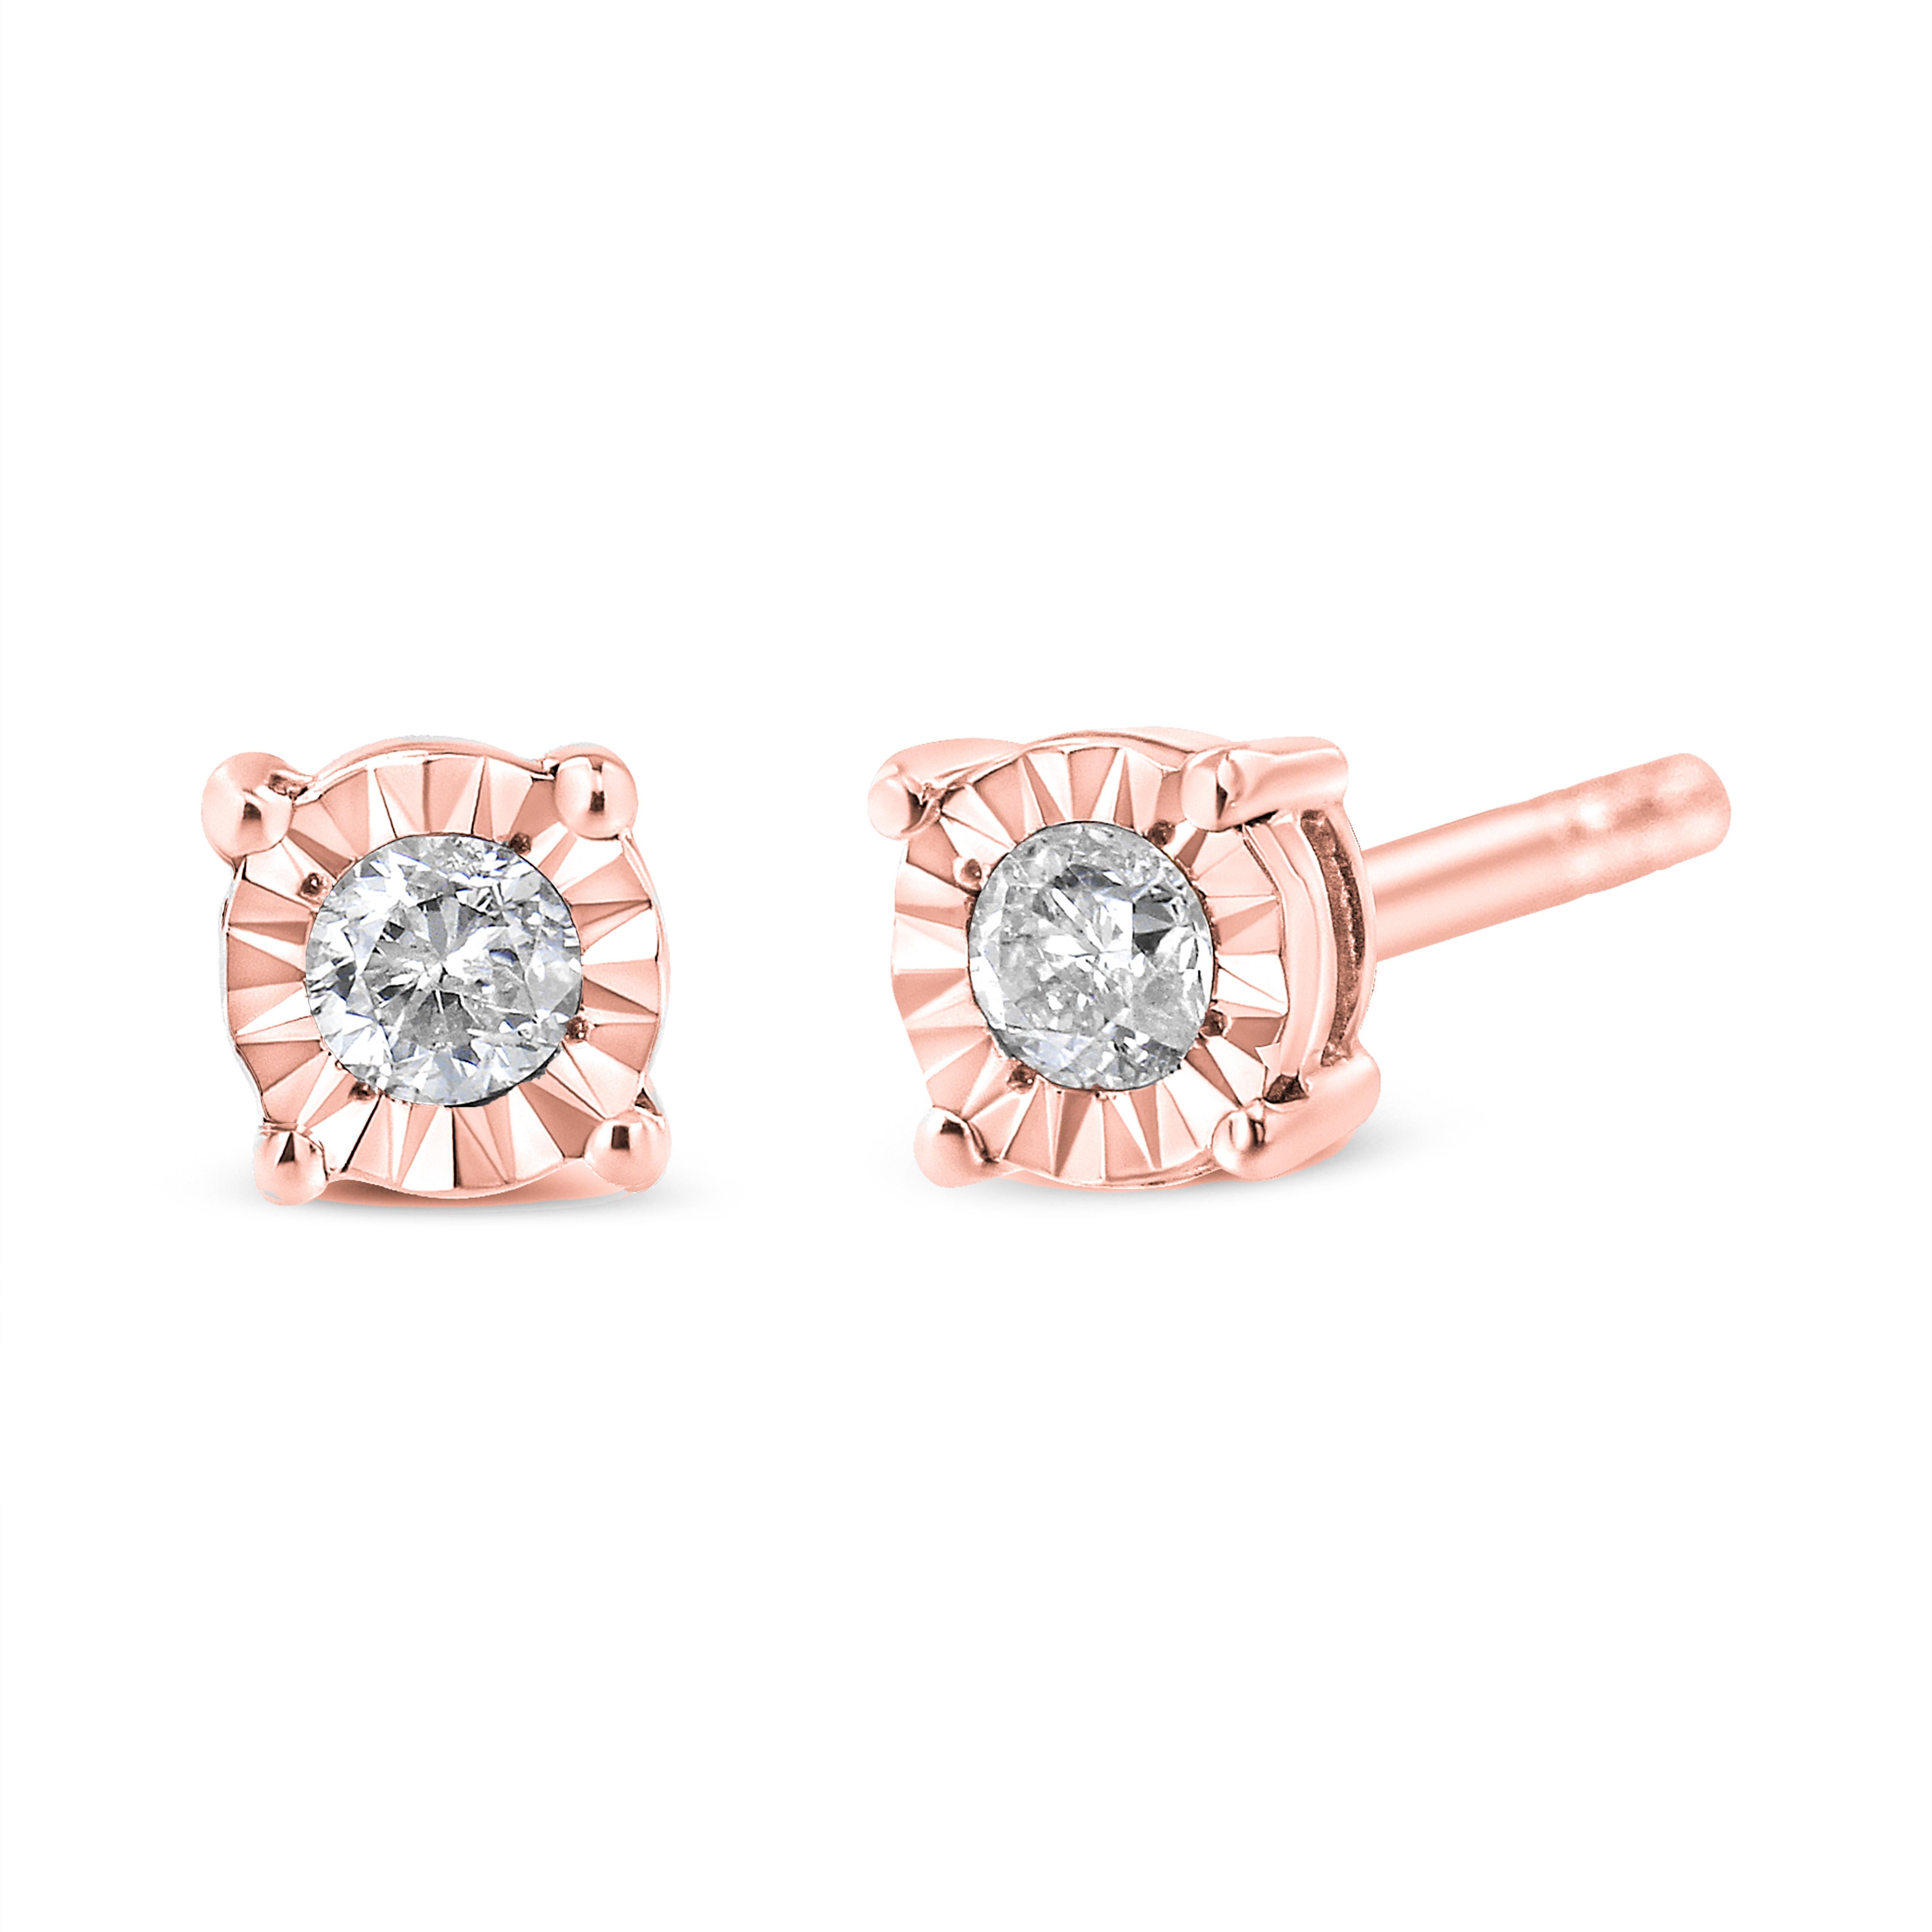 Add a shimmering touch to your wardrobe with these elegant and extravagant diamond earrings. Fashioned in the round shape, the earrings are crafted of your choice of sterling silver plated with white rhodium, or with 10K rose or yellow gold